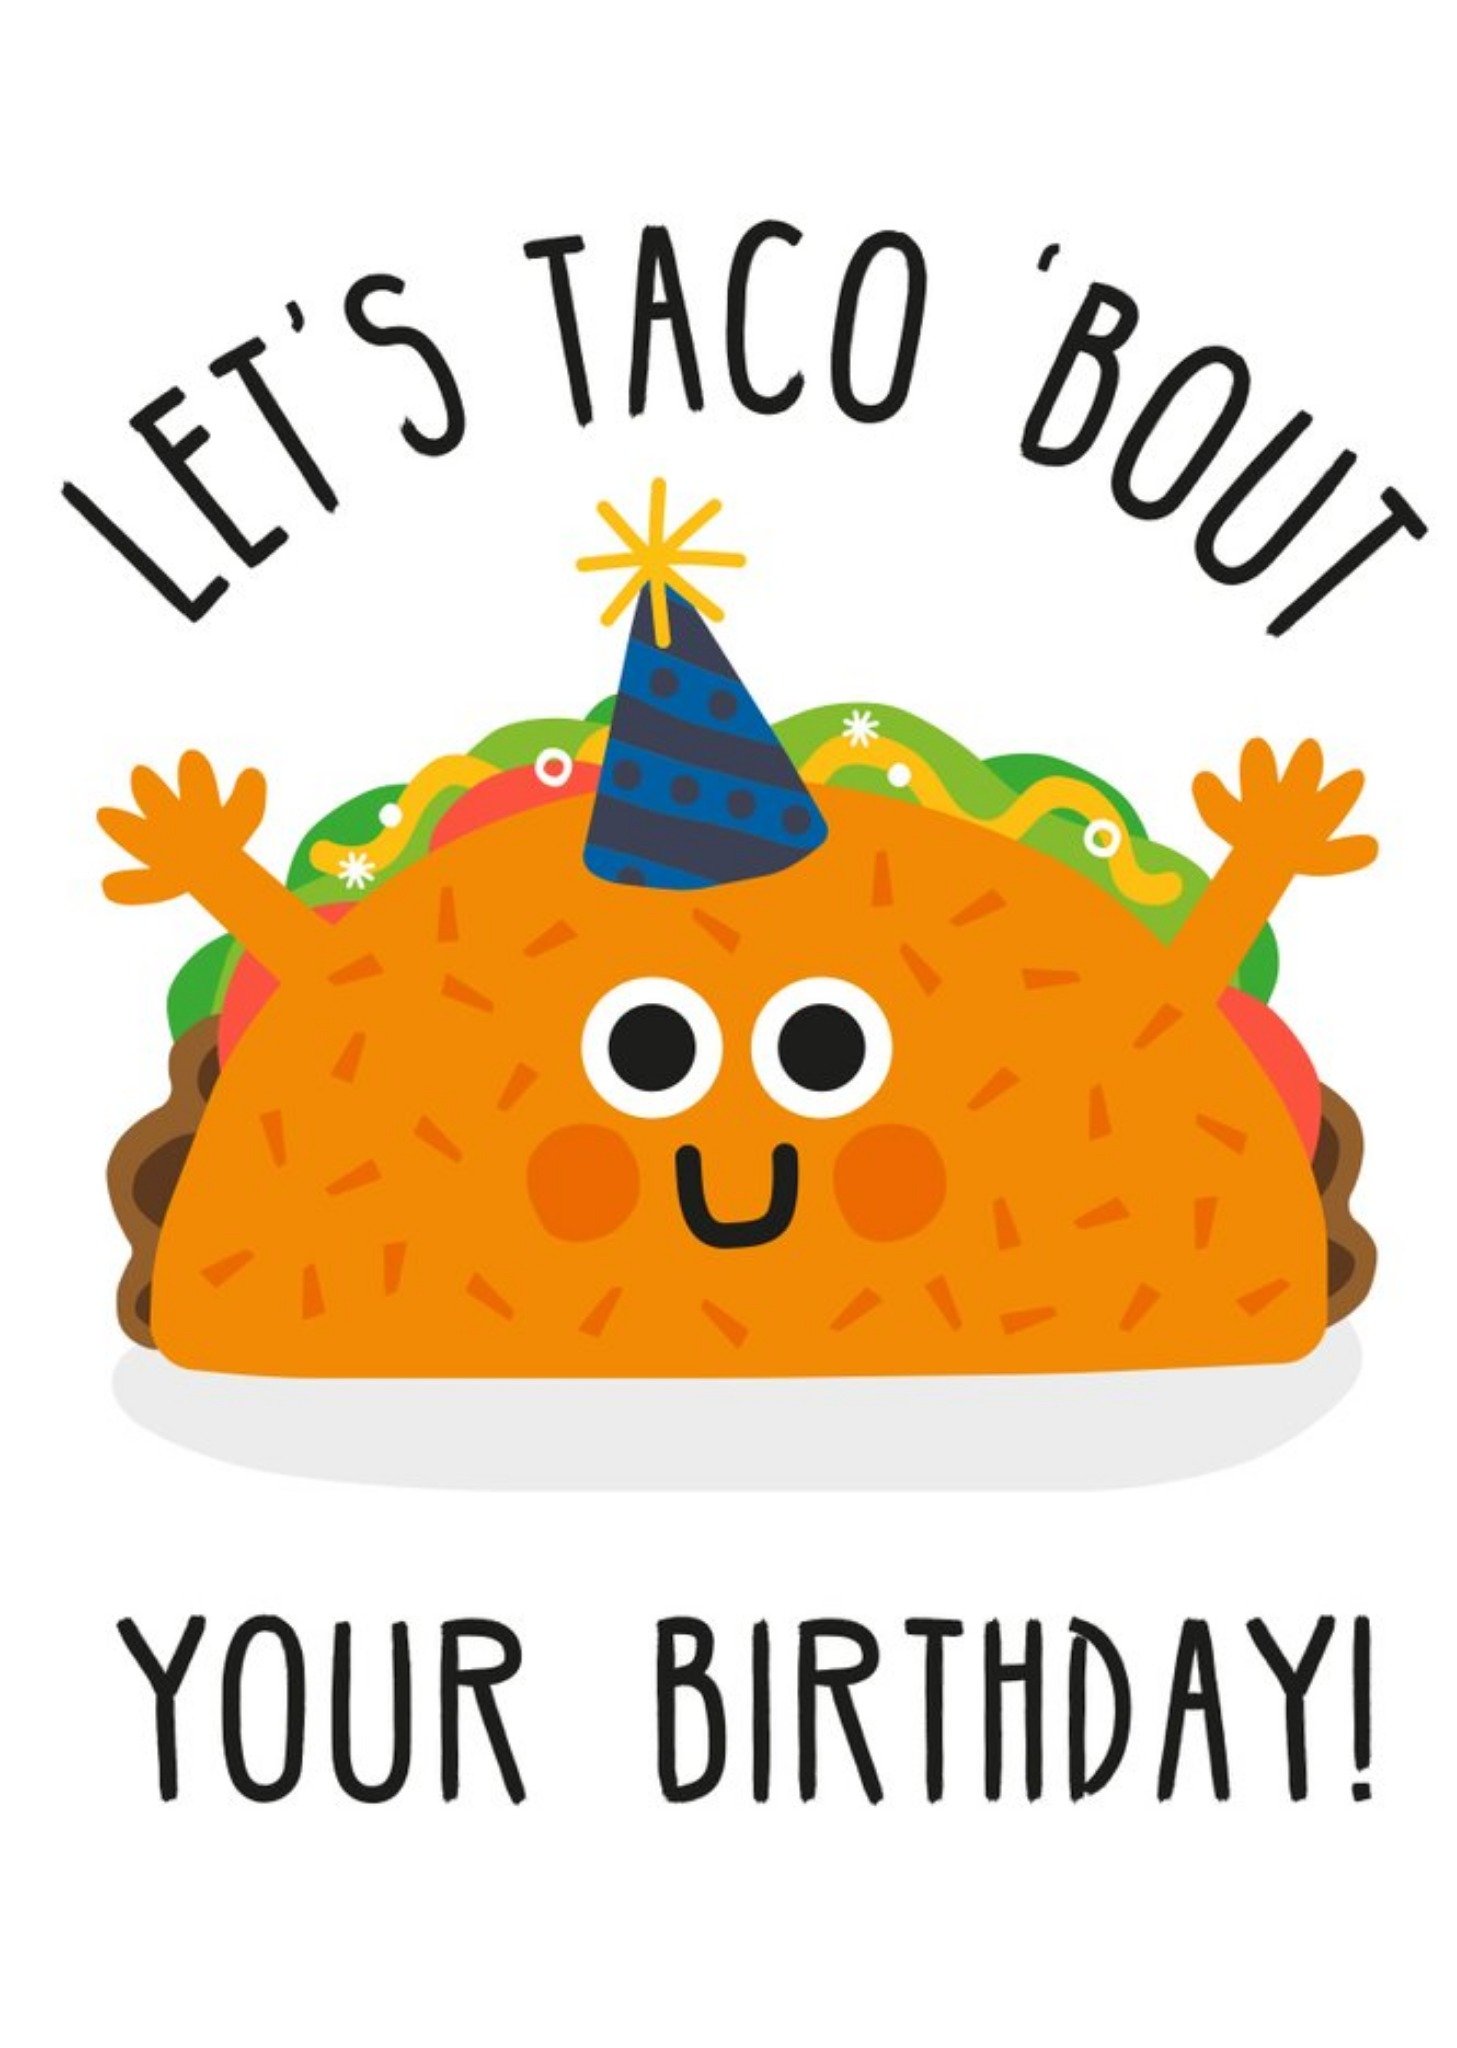 Moonpig Illustration Of A Cute Taco Let's Taco Bout Your Birthday Funny Pun Card, Large